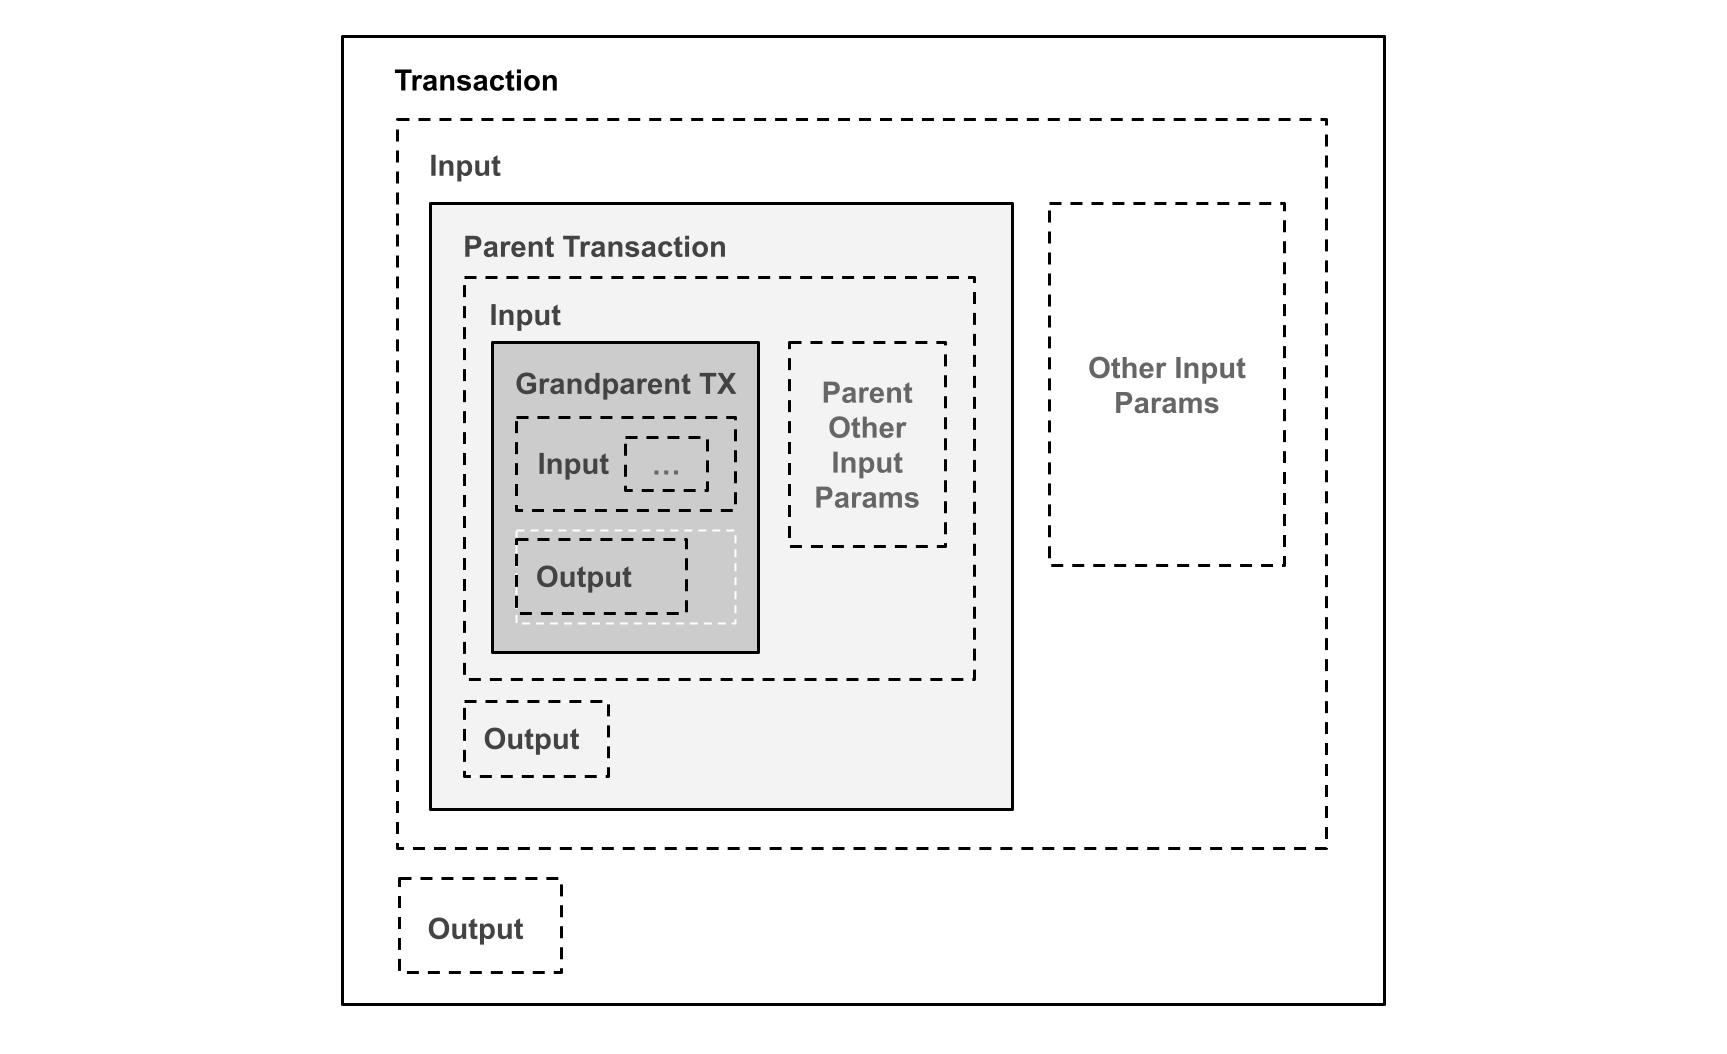 Diagram 6. Full parent transaction validation, mathematical induction proof by embedding the full parent transactions into the inputs resulting in exponential transaction size increase.